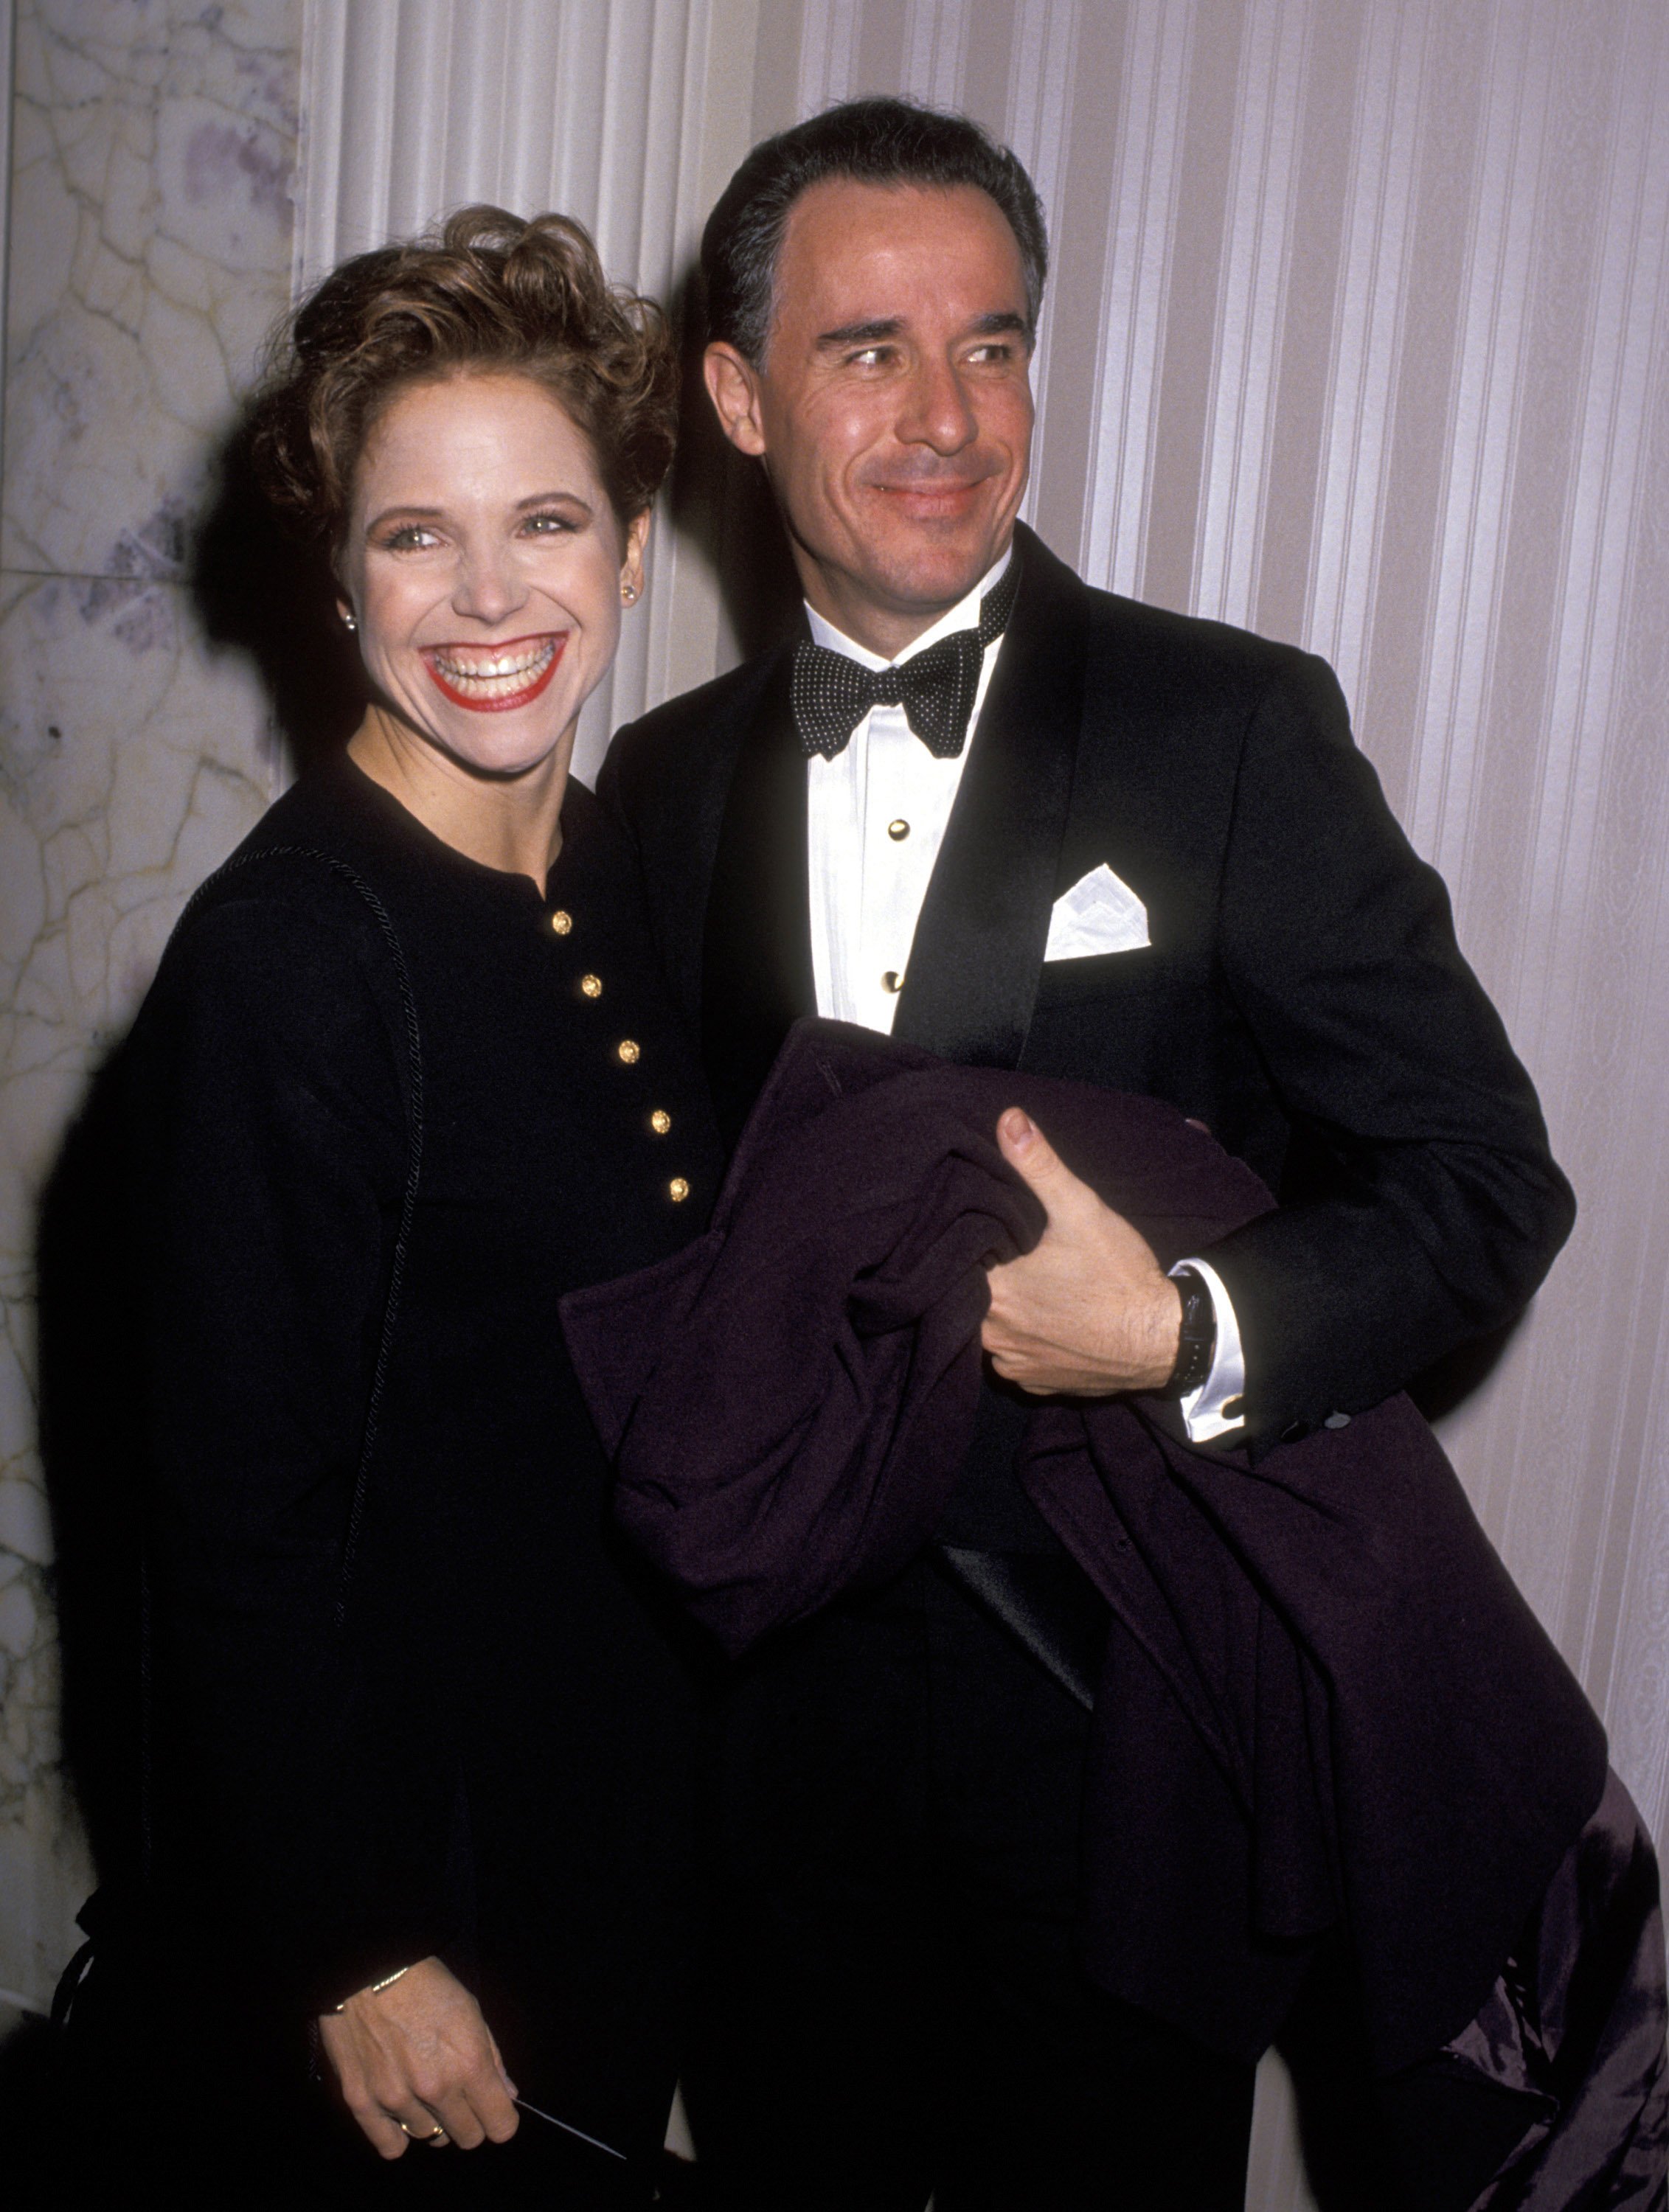 Katie Couric and her late husband Jay Manahan at the Sprit of Liberty Awards in 1994. | Source: Getty Images